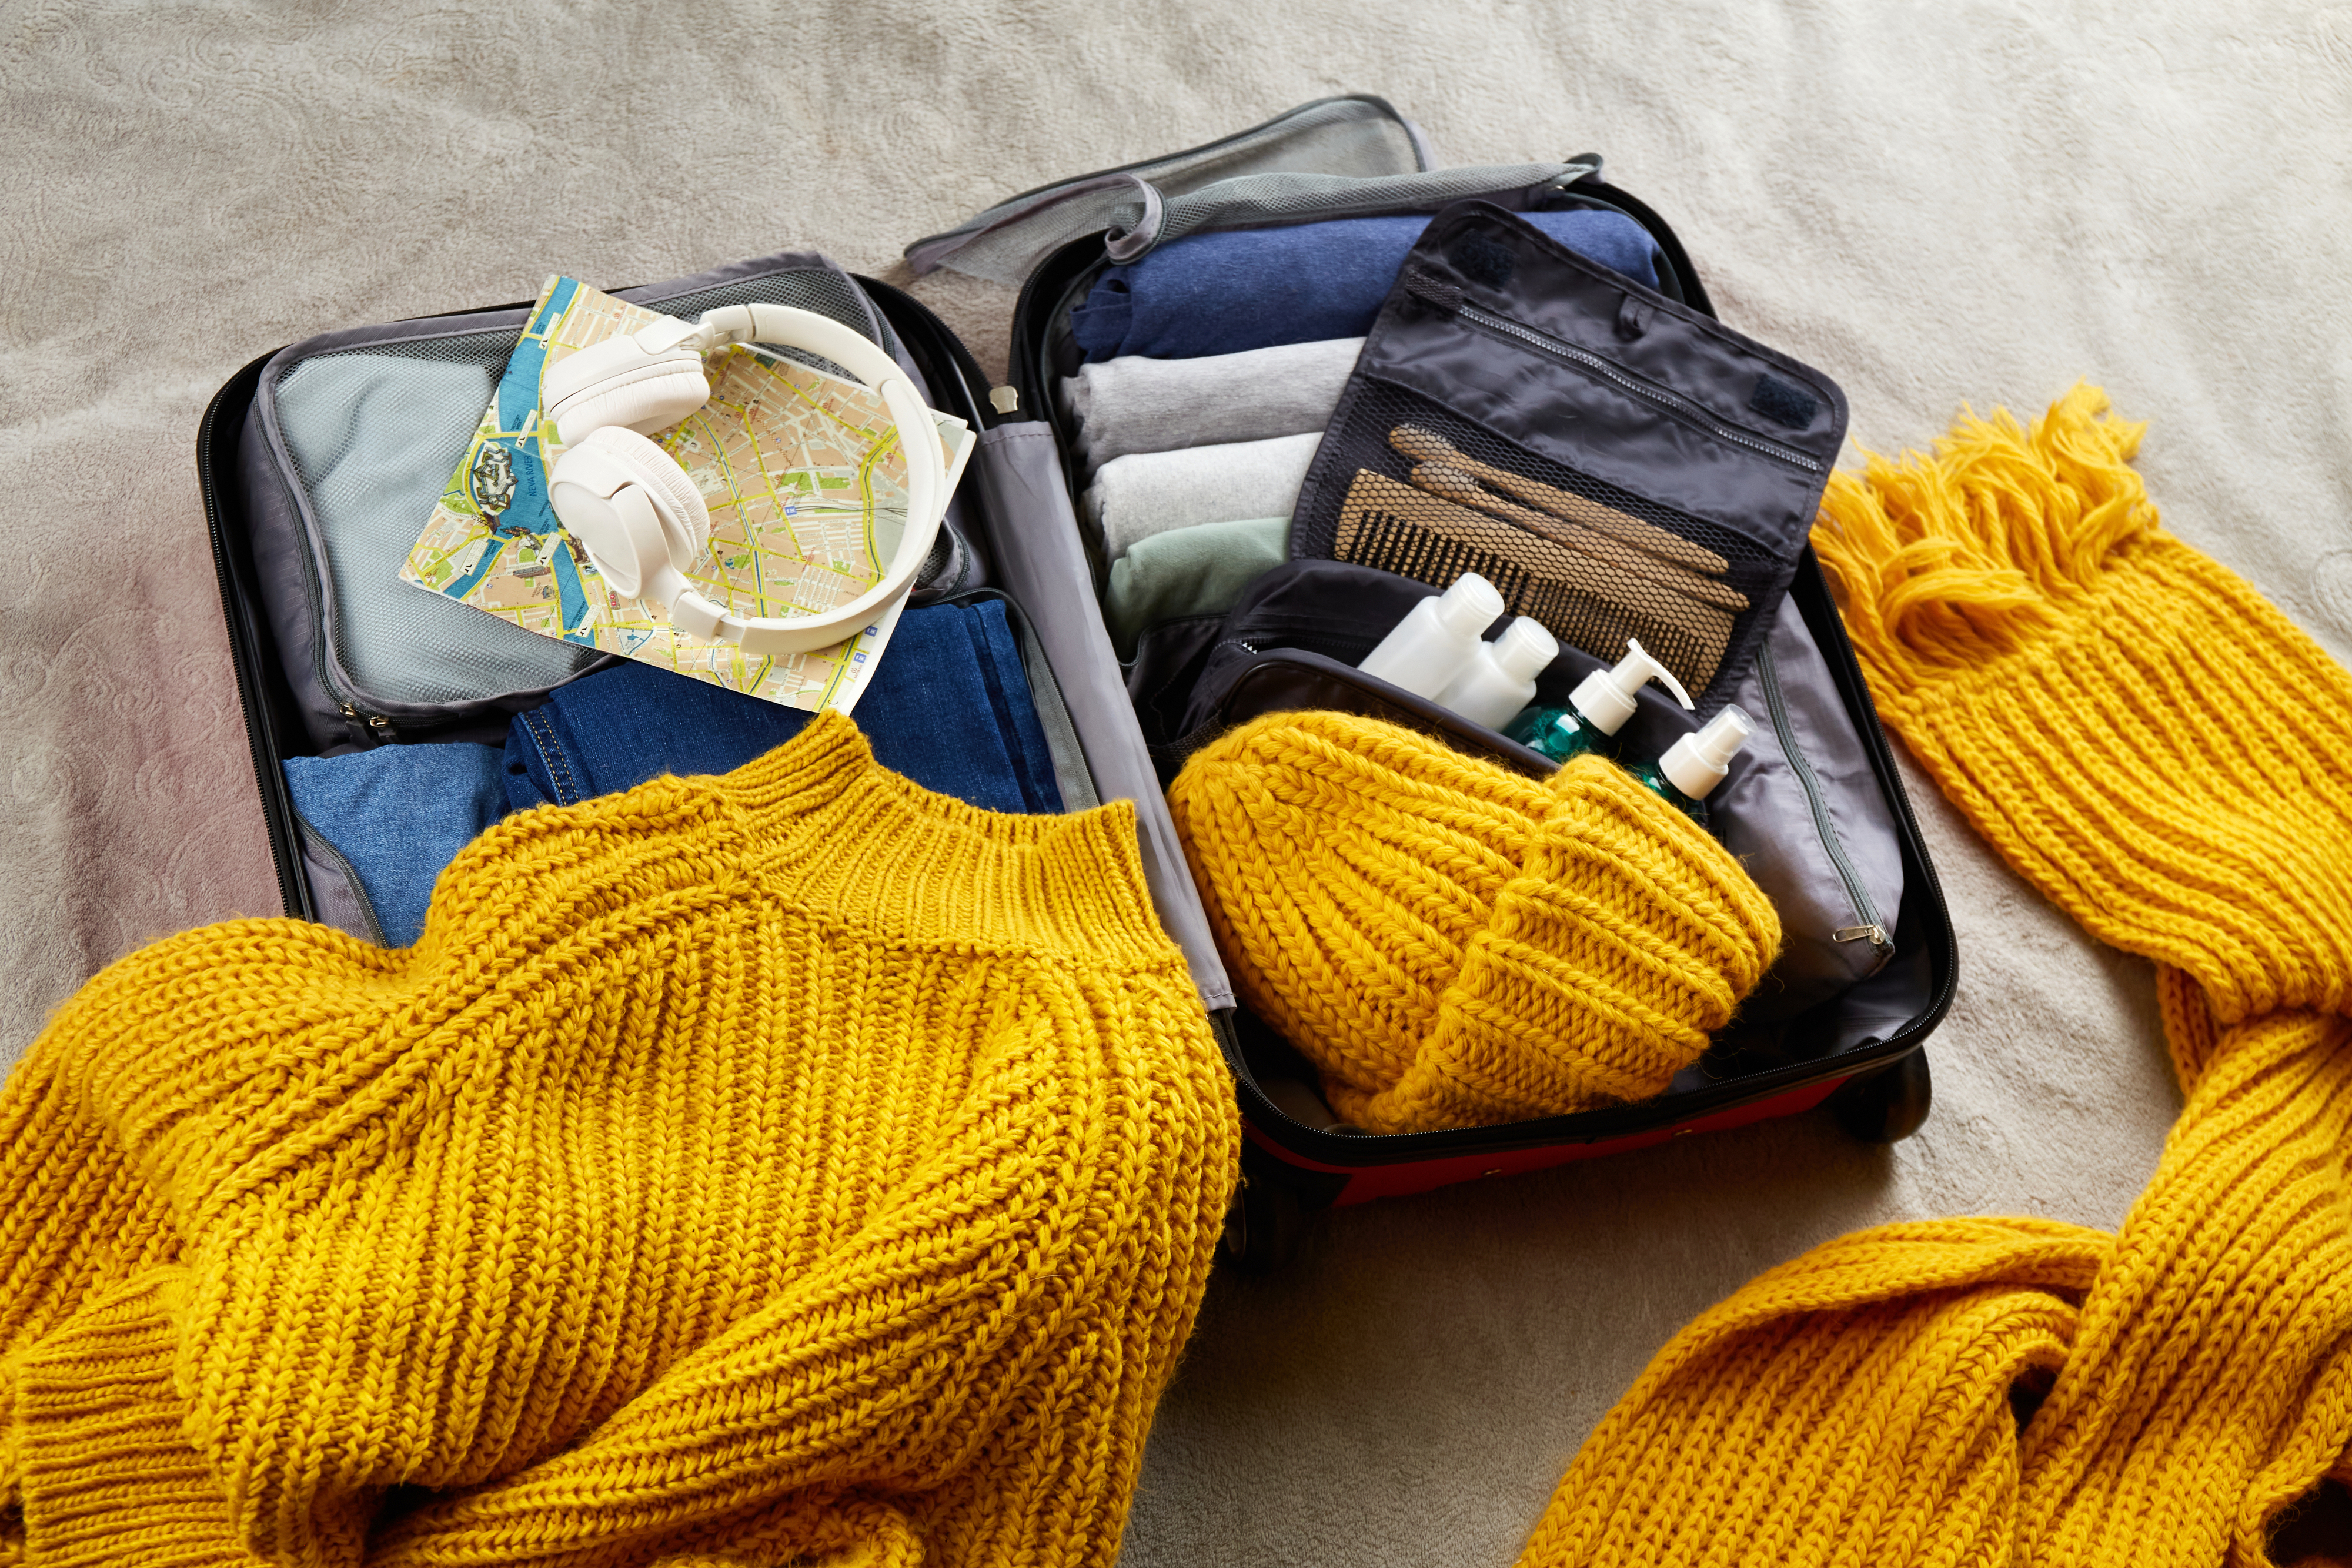 Open suitcase with clothes, headphones, map, and toiletries, alongside a yellow knitted scarf and hat